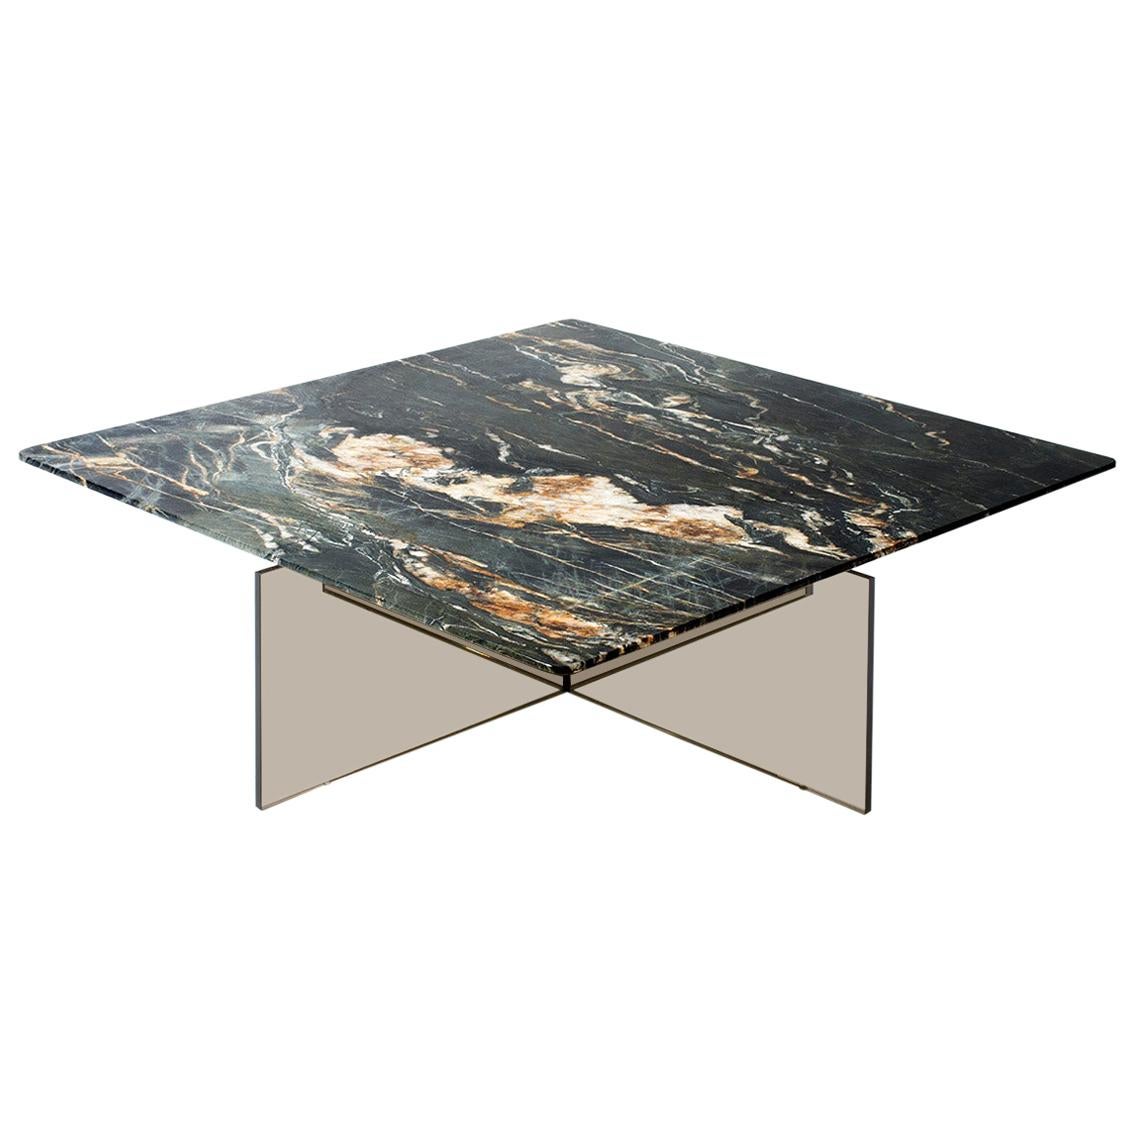 Claste beside Myself Small Coffee Table in Belvedere Black Marble & Glass Base